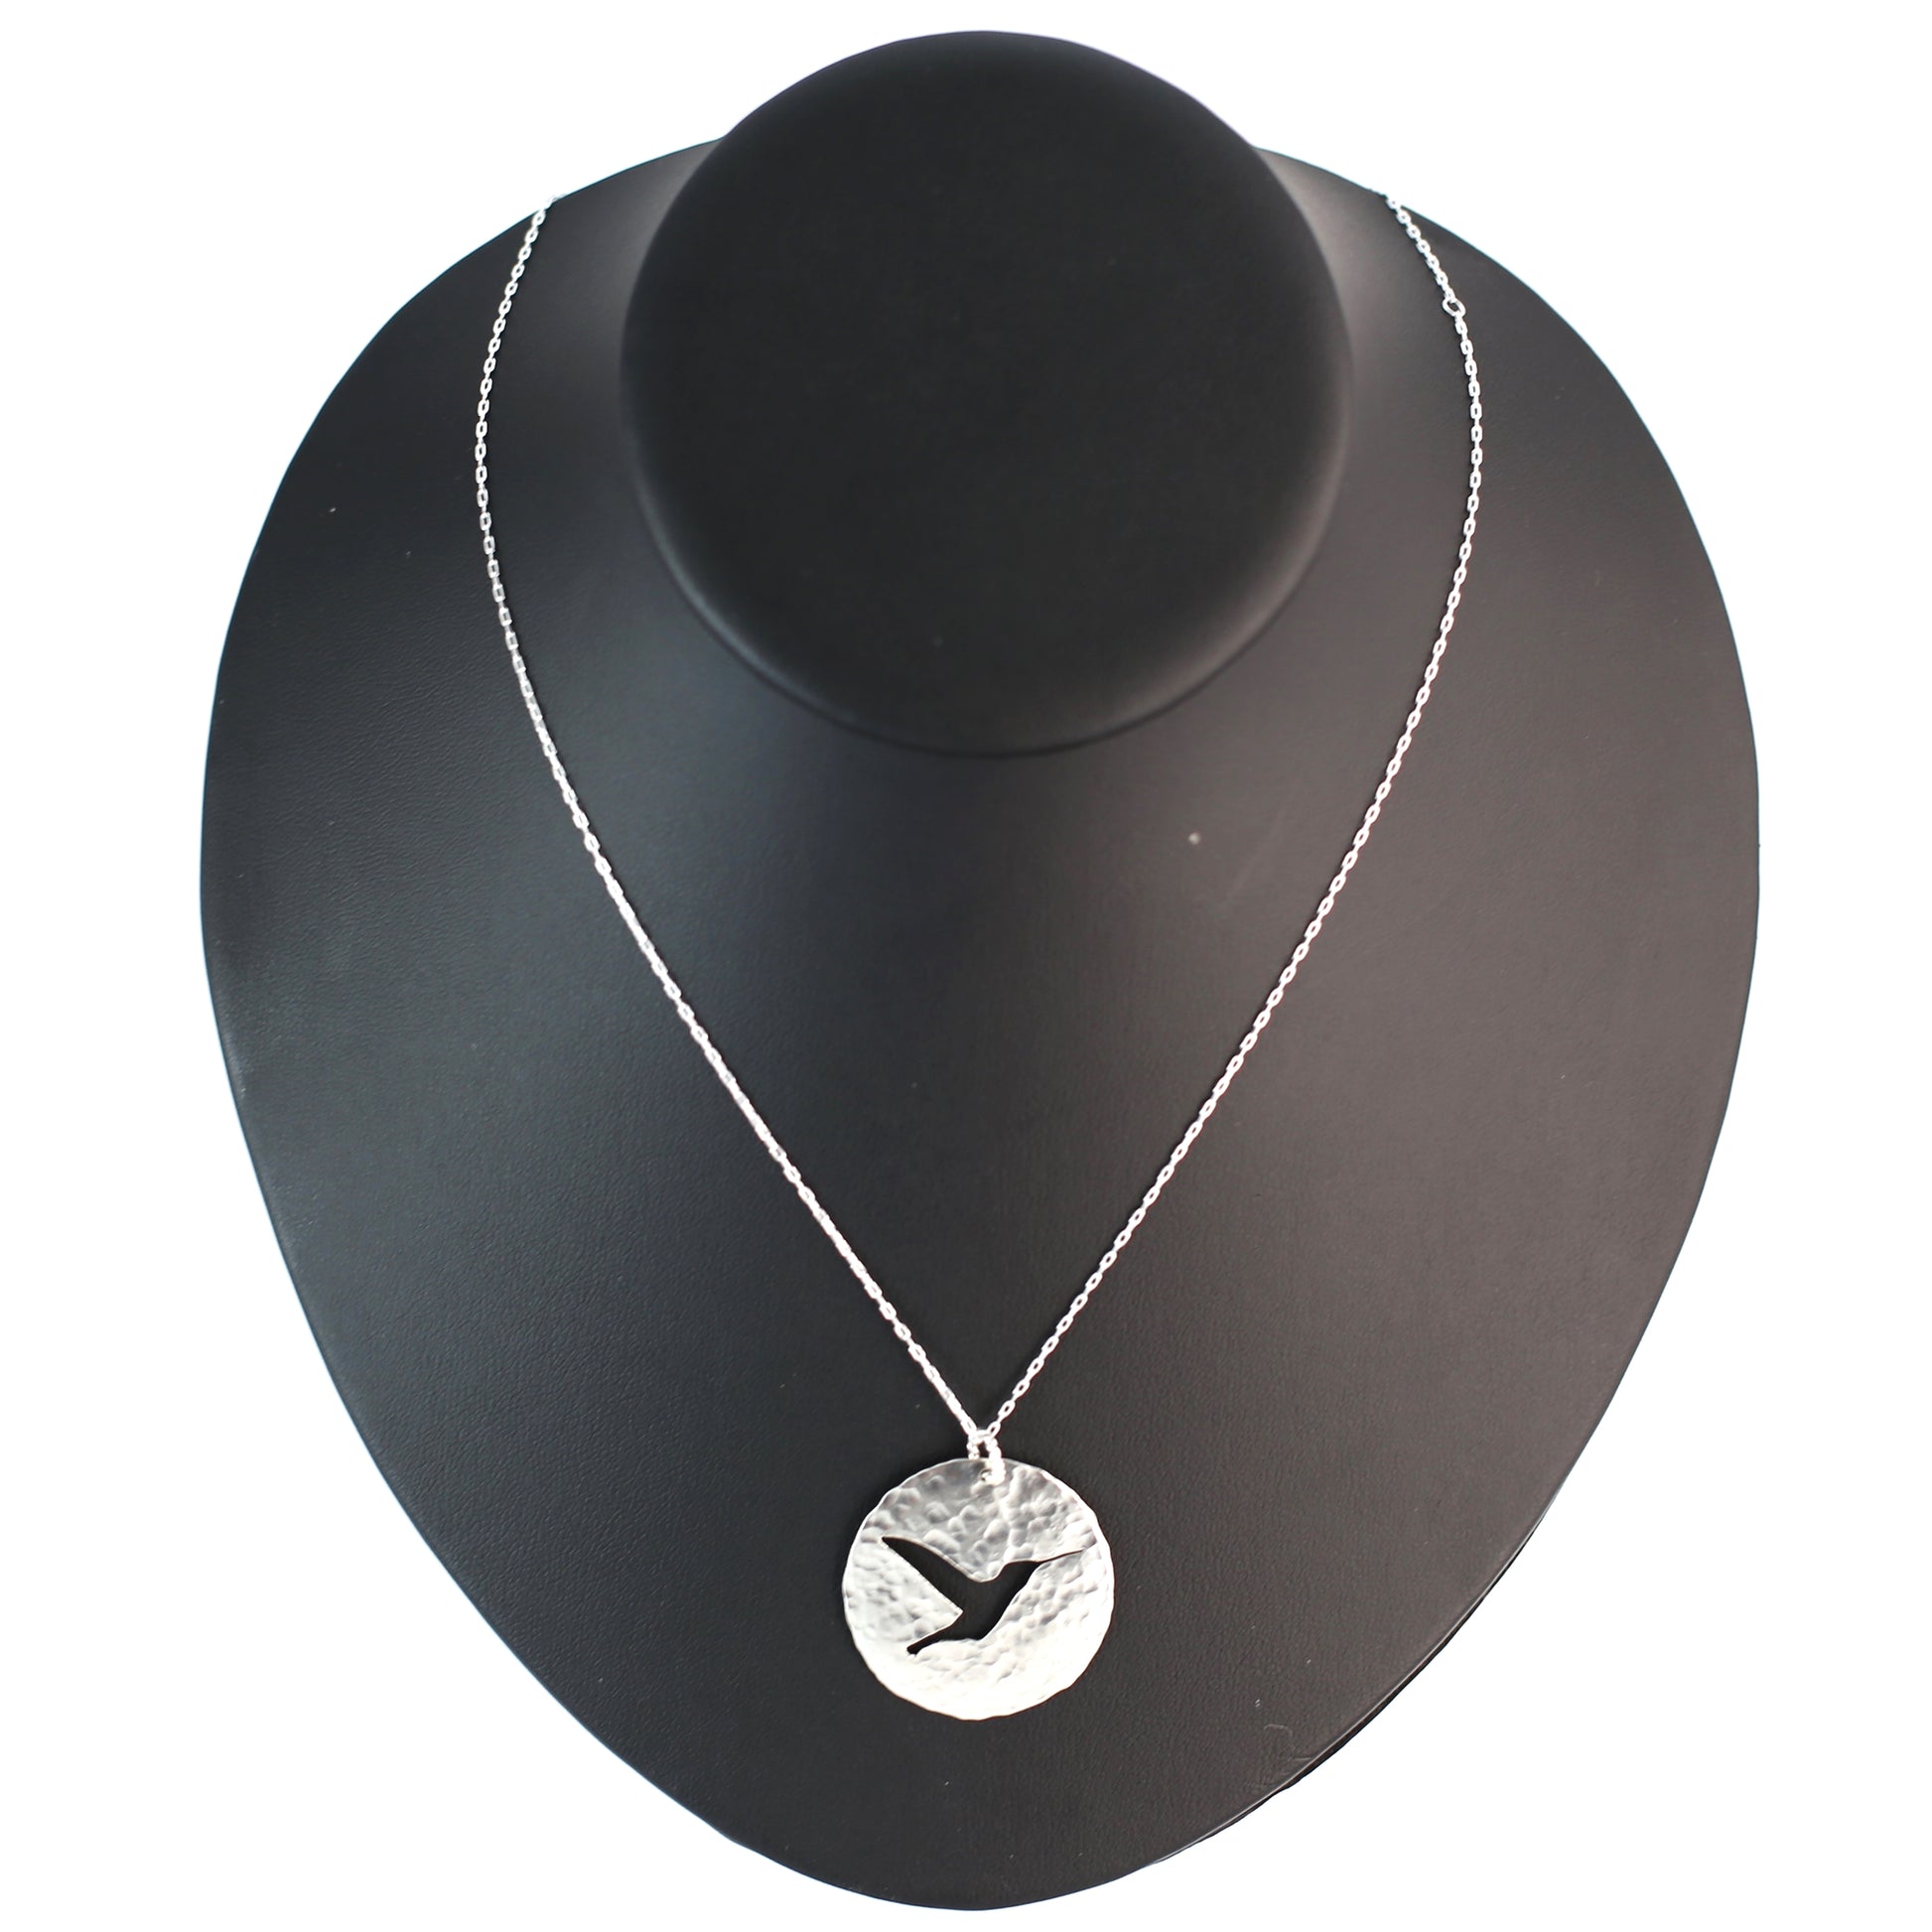 Hummingbird Hand Cut and Hammered Circle Pendant Necklace in Sterling Silver